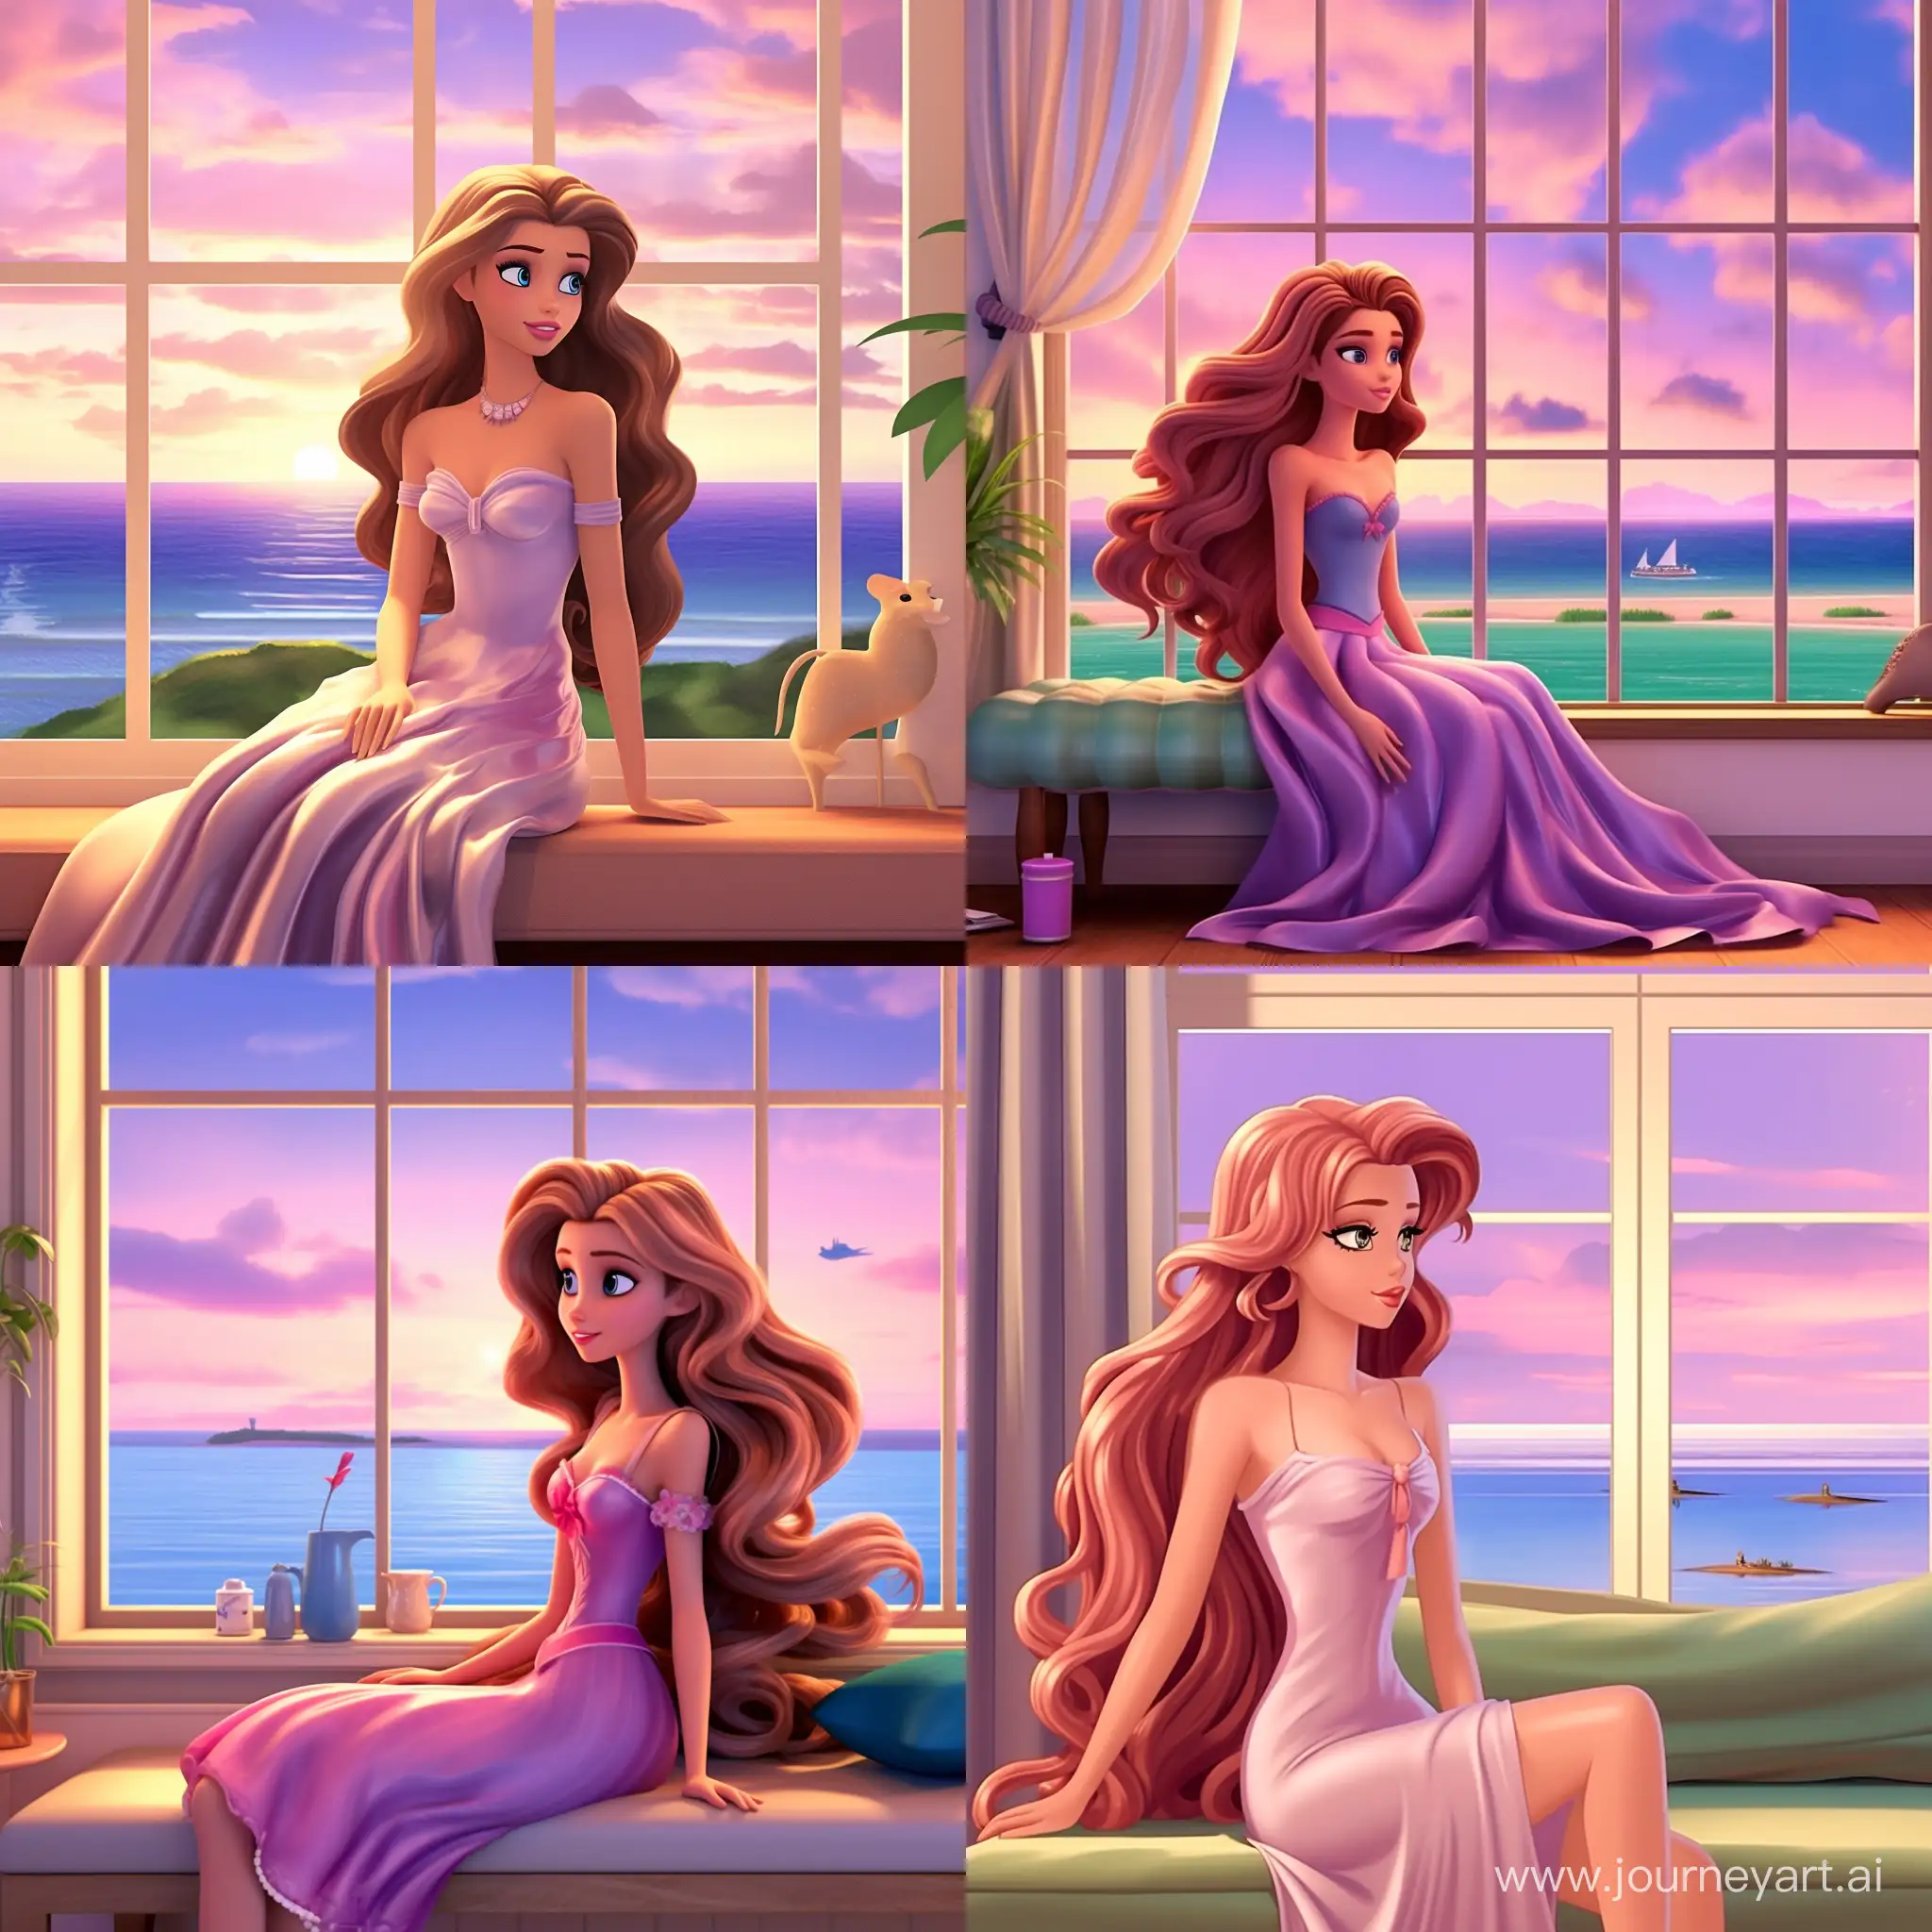 Generate a super realistic girl photomodel, sitting on a window nook on pink and lilac cushions. The window has beige curtains and beautiful summer view over the sea and beach from the window during sunset. The girl is very beautiful with symetric lines, greyish-green eyes, thick elegant eyebrows and beautiful dark chestnut colored hair. She is very innoent and beautiful but also sensual and really photorealistic! She is also holding a louis vuitton bag.